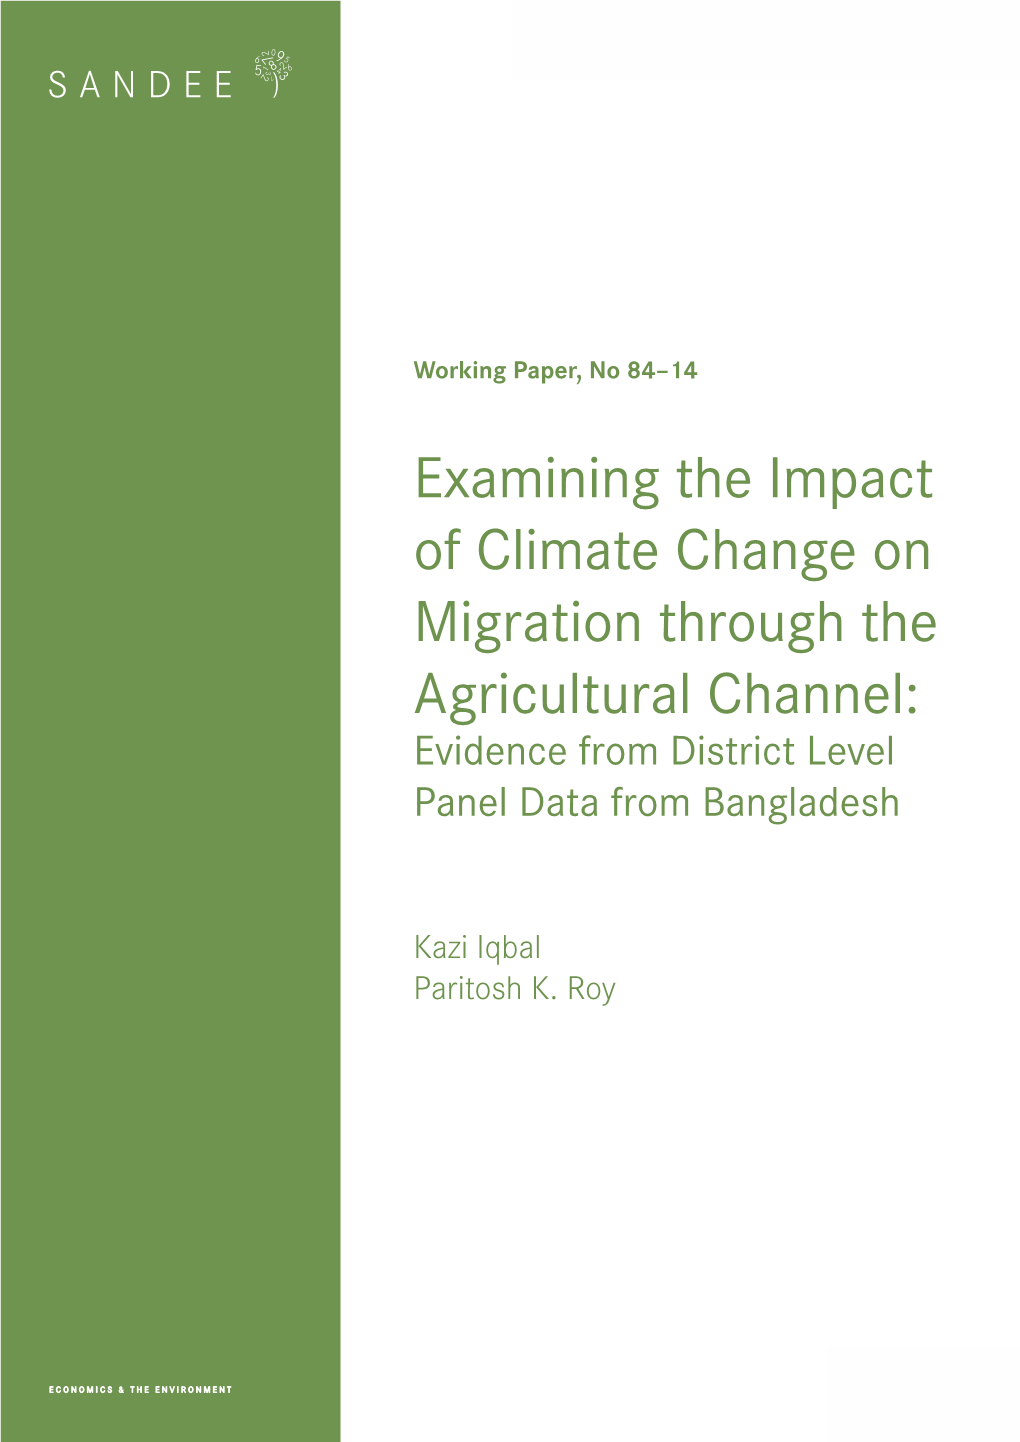 Examining the Impact of Climate Change on Migration Through the Agricultural Channel: Evidence from District Level Panel Data from Bangladesh